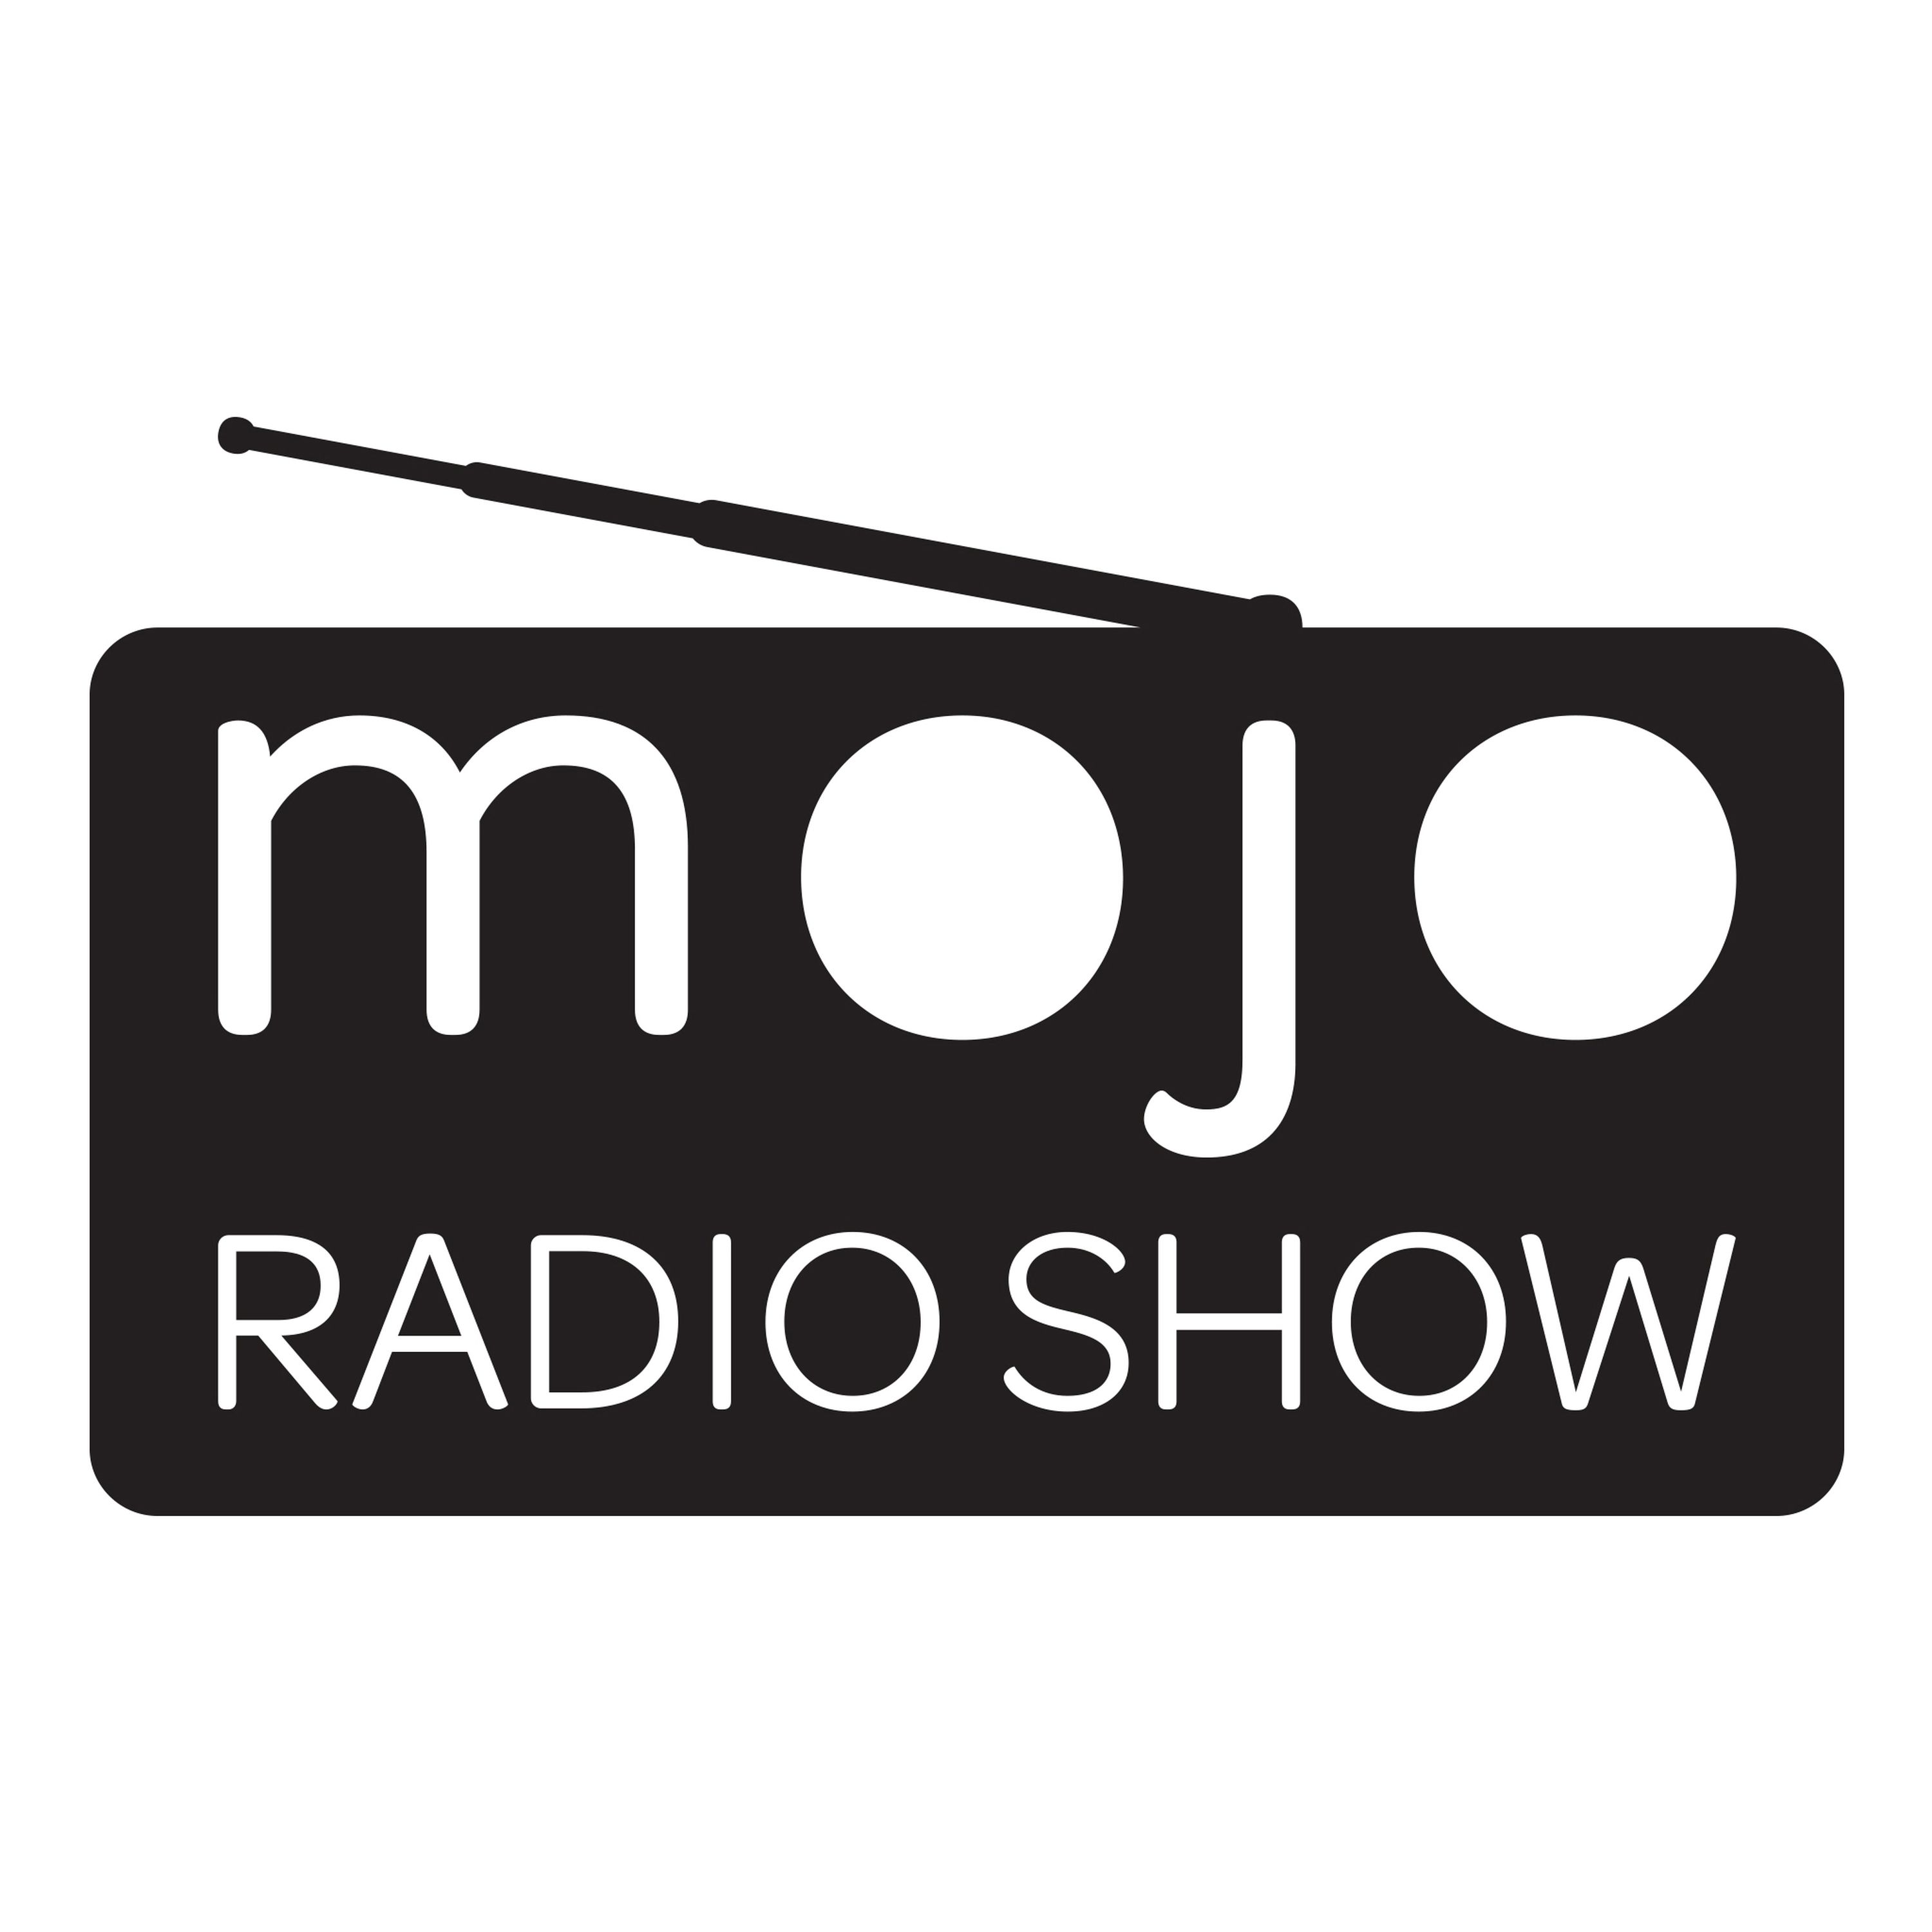 The Mojo Radio Show EP 155: Never Quit: A Navy Divers Life After a Brutal Shark Attack - Paul de Gelder